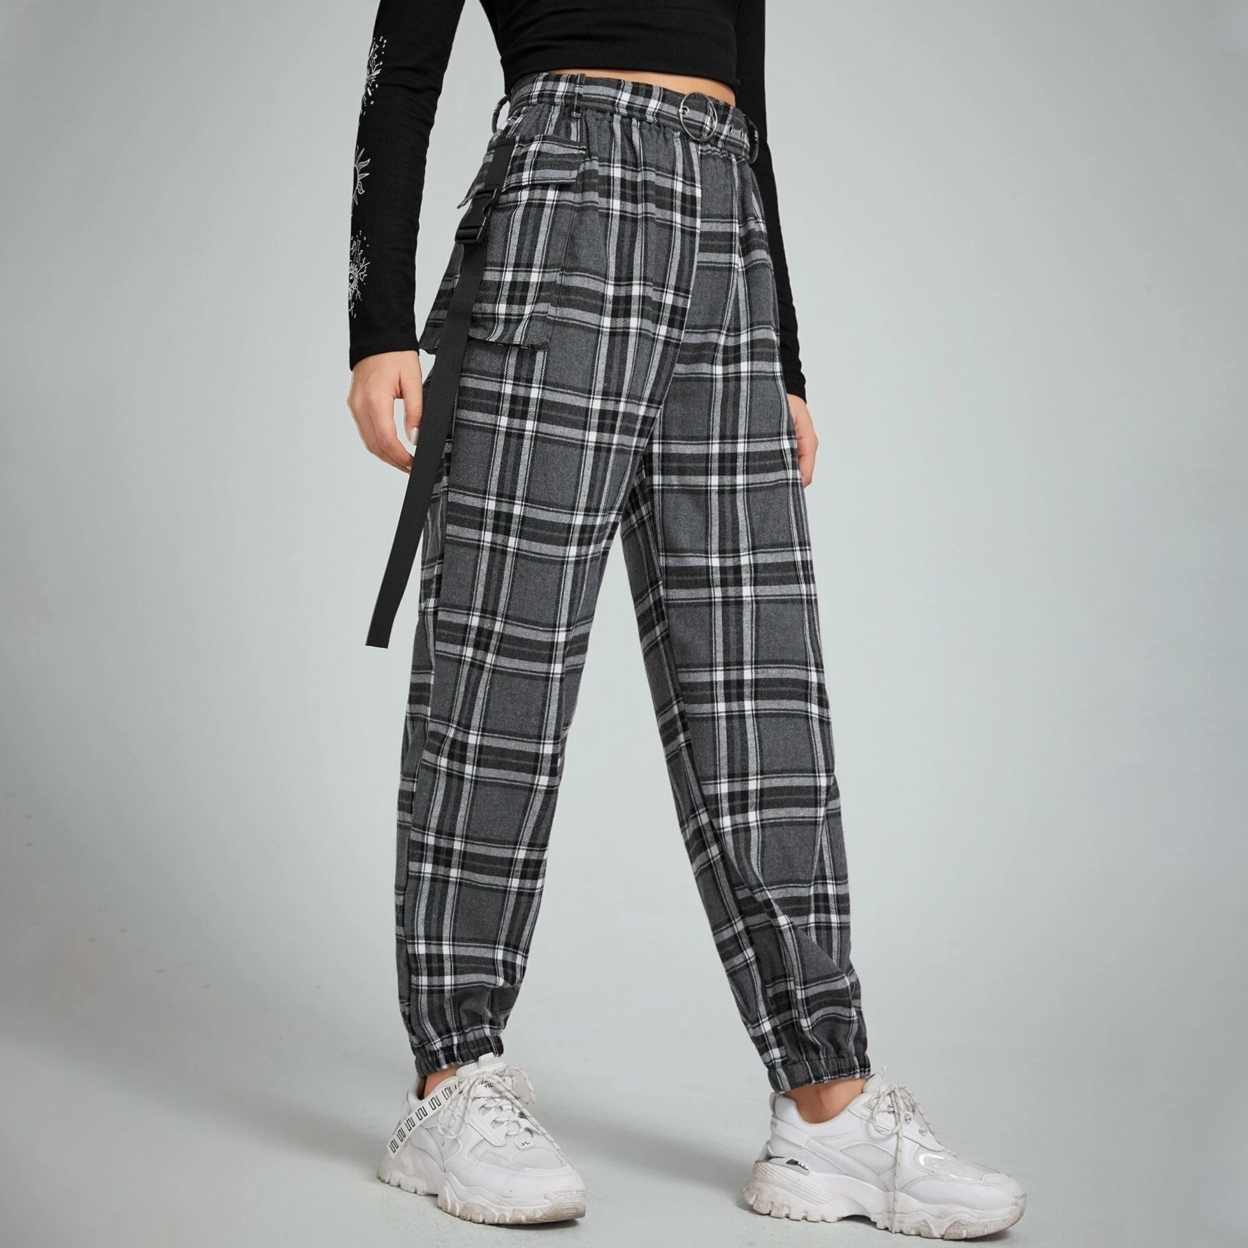 Belted Plaid Joggers - L